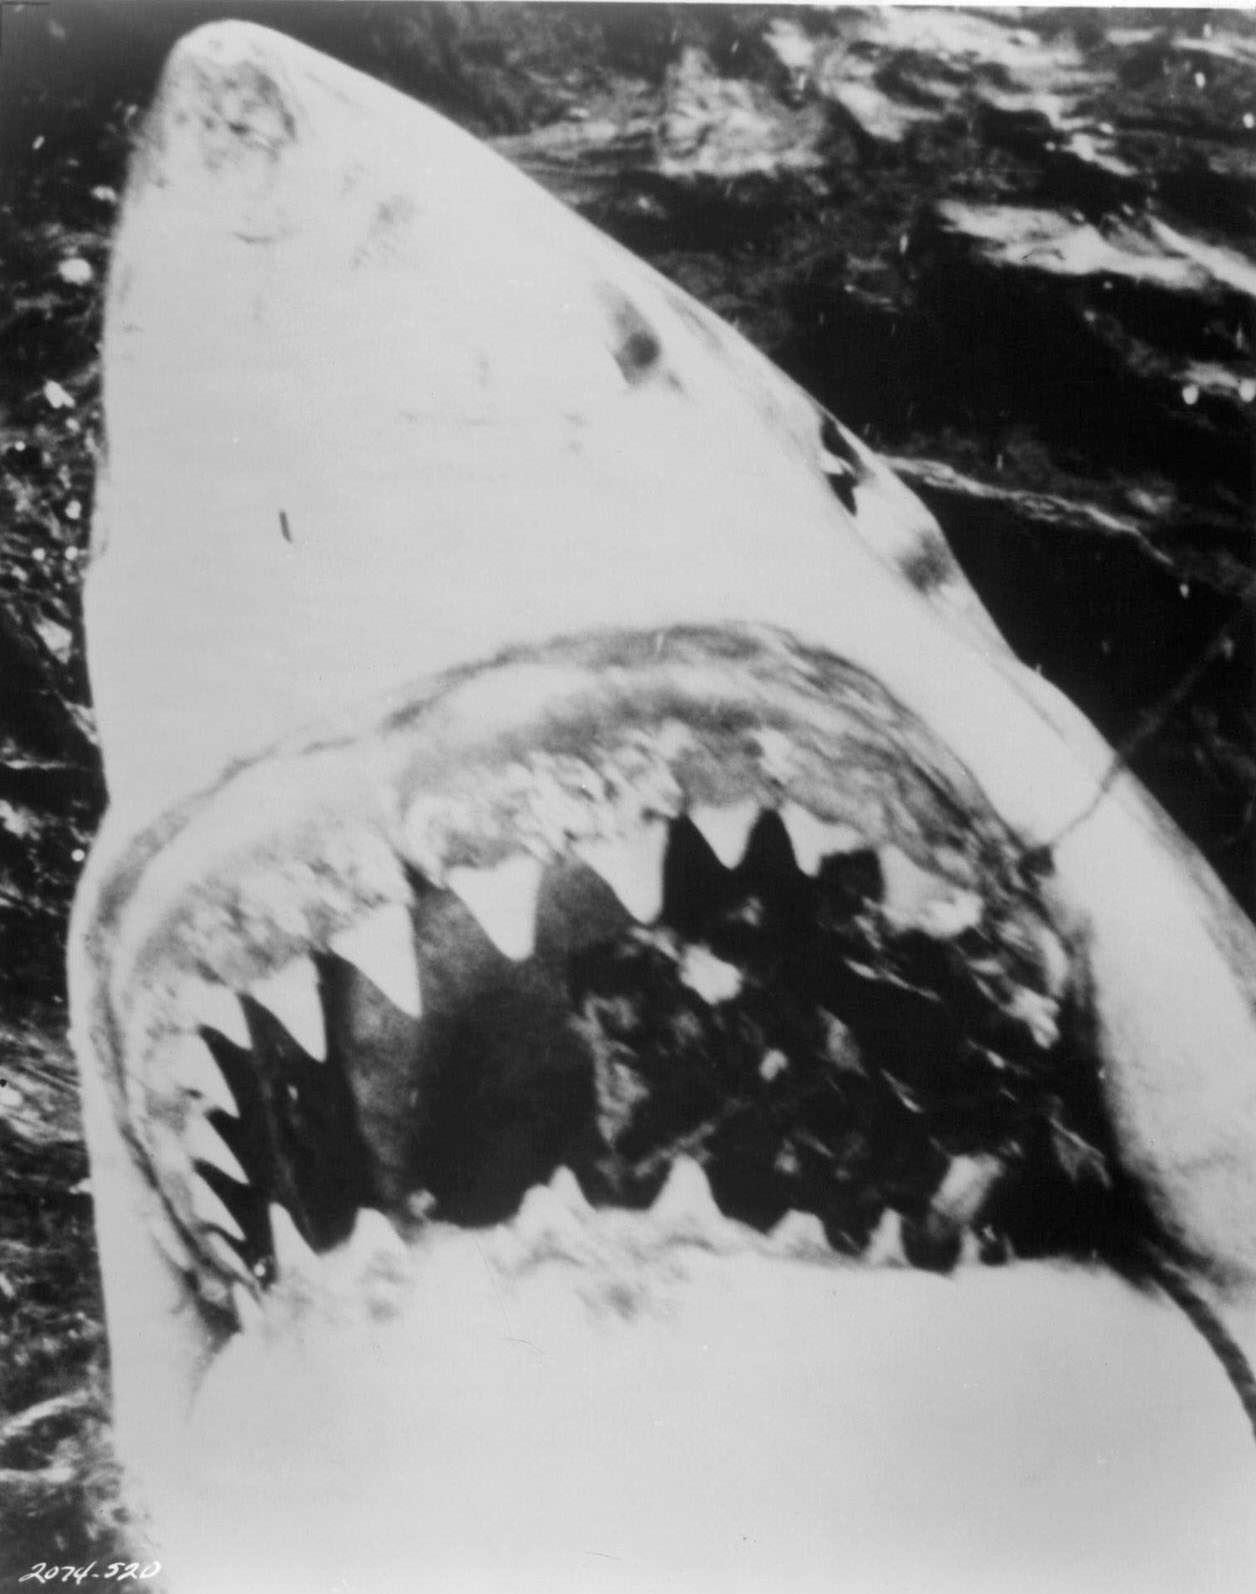 Harpooned many times by a fisherman bent on its destruction, a great white shark surfaces in an attempt to wreck a fishing boat in a scene from the film 'Jaws', 1975.